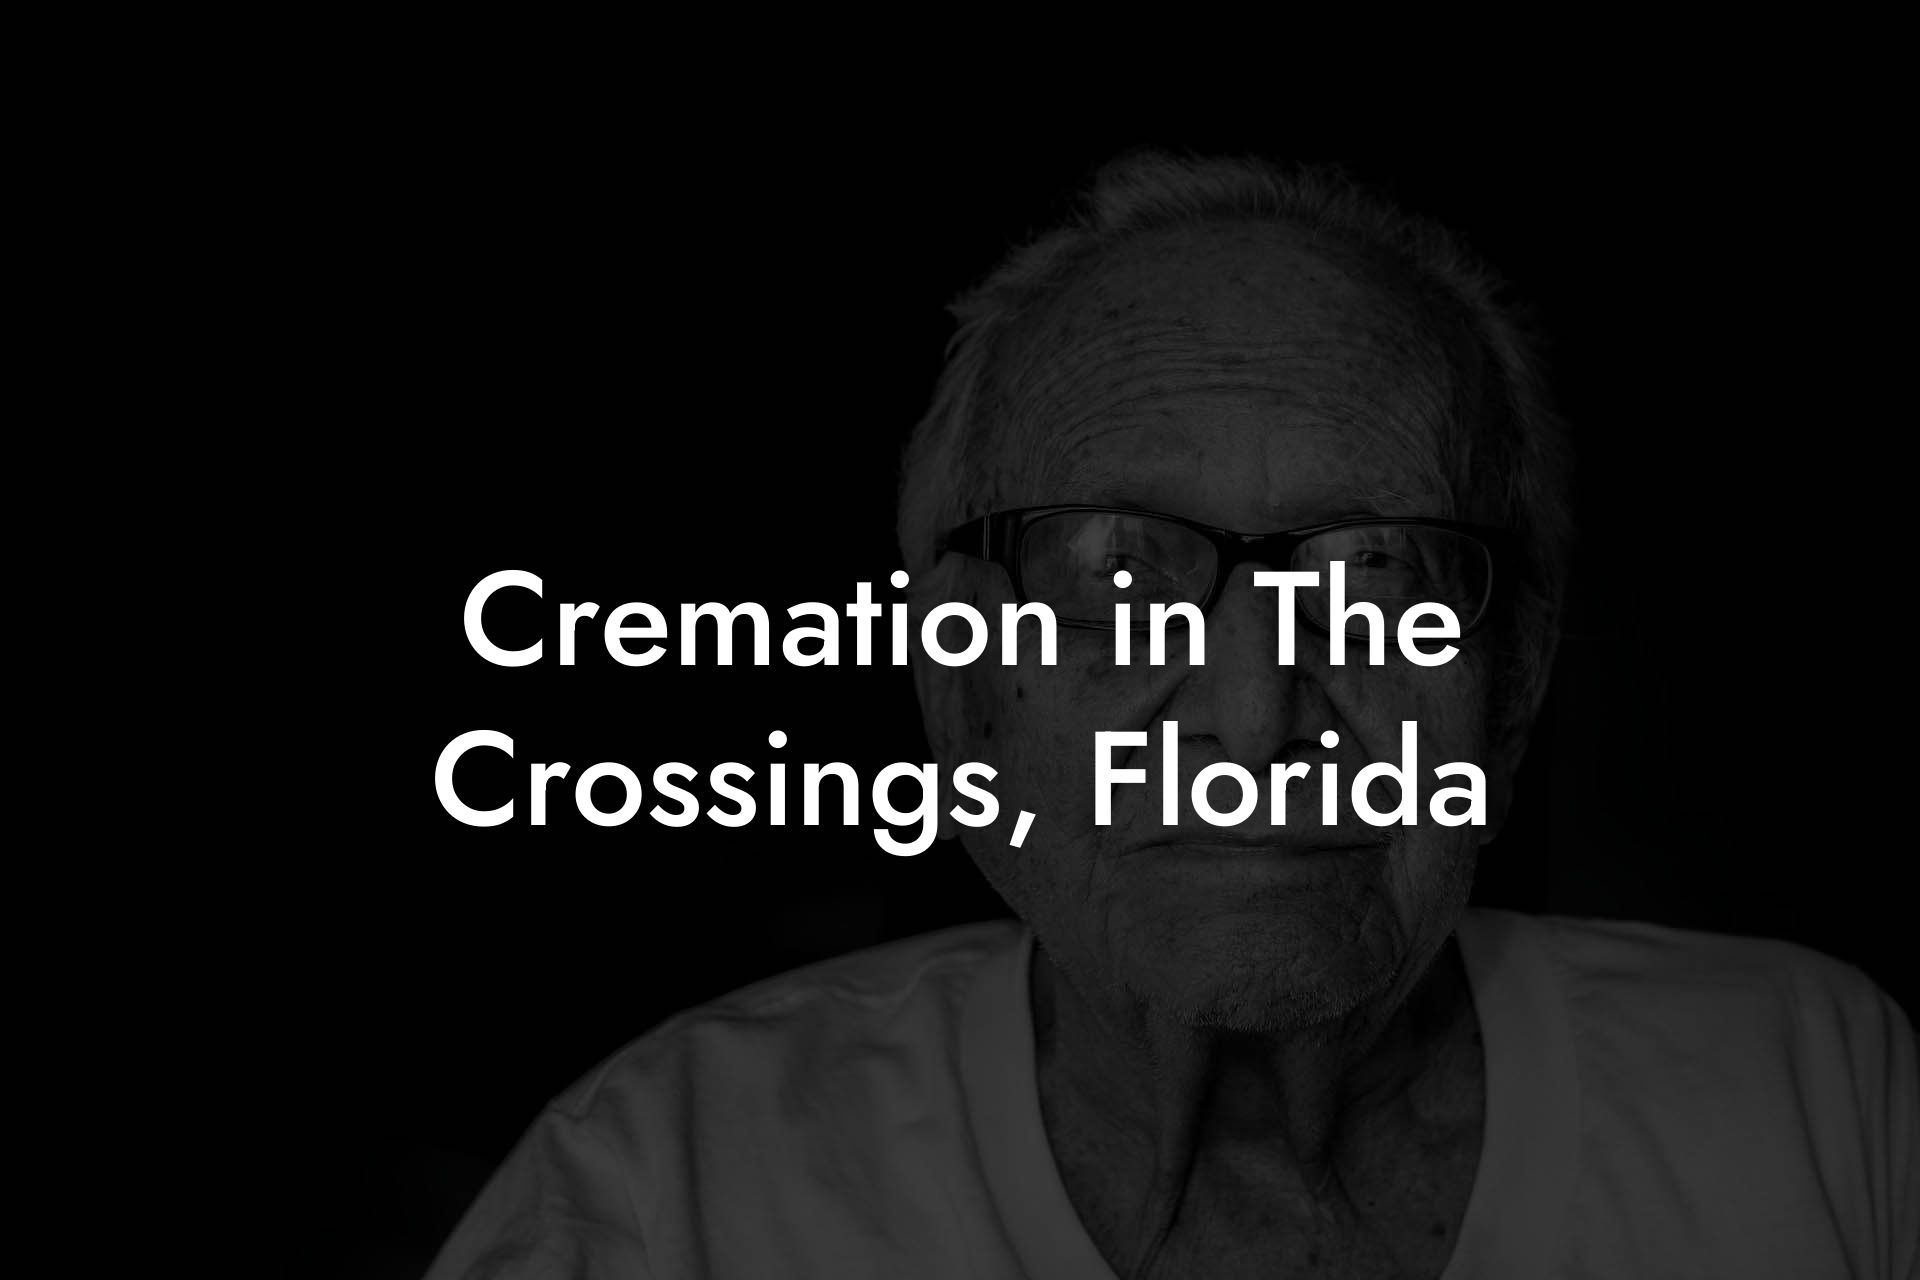 Cremation in The Crossings, Florida